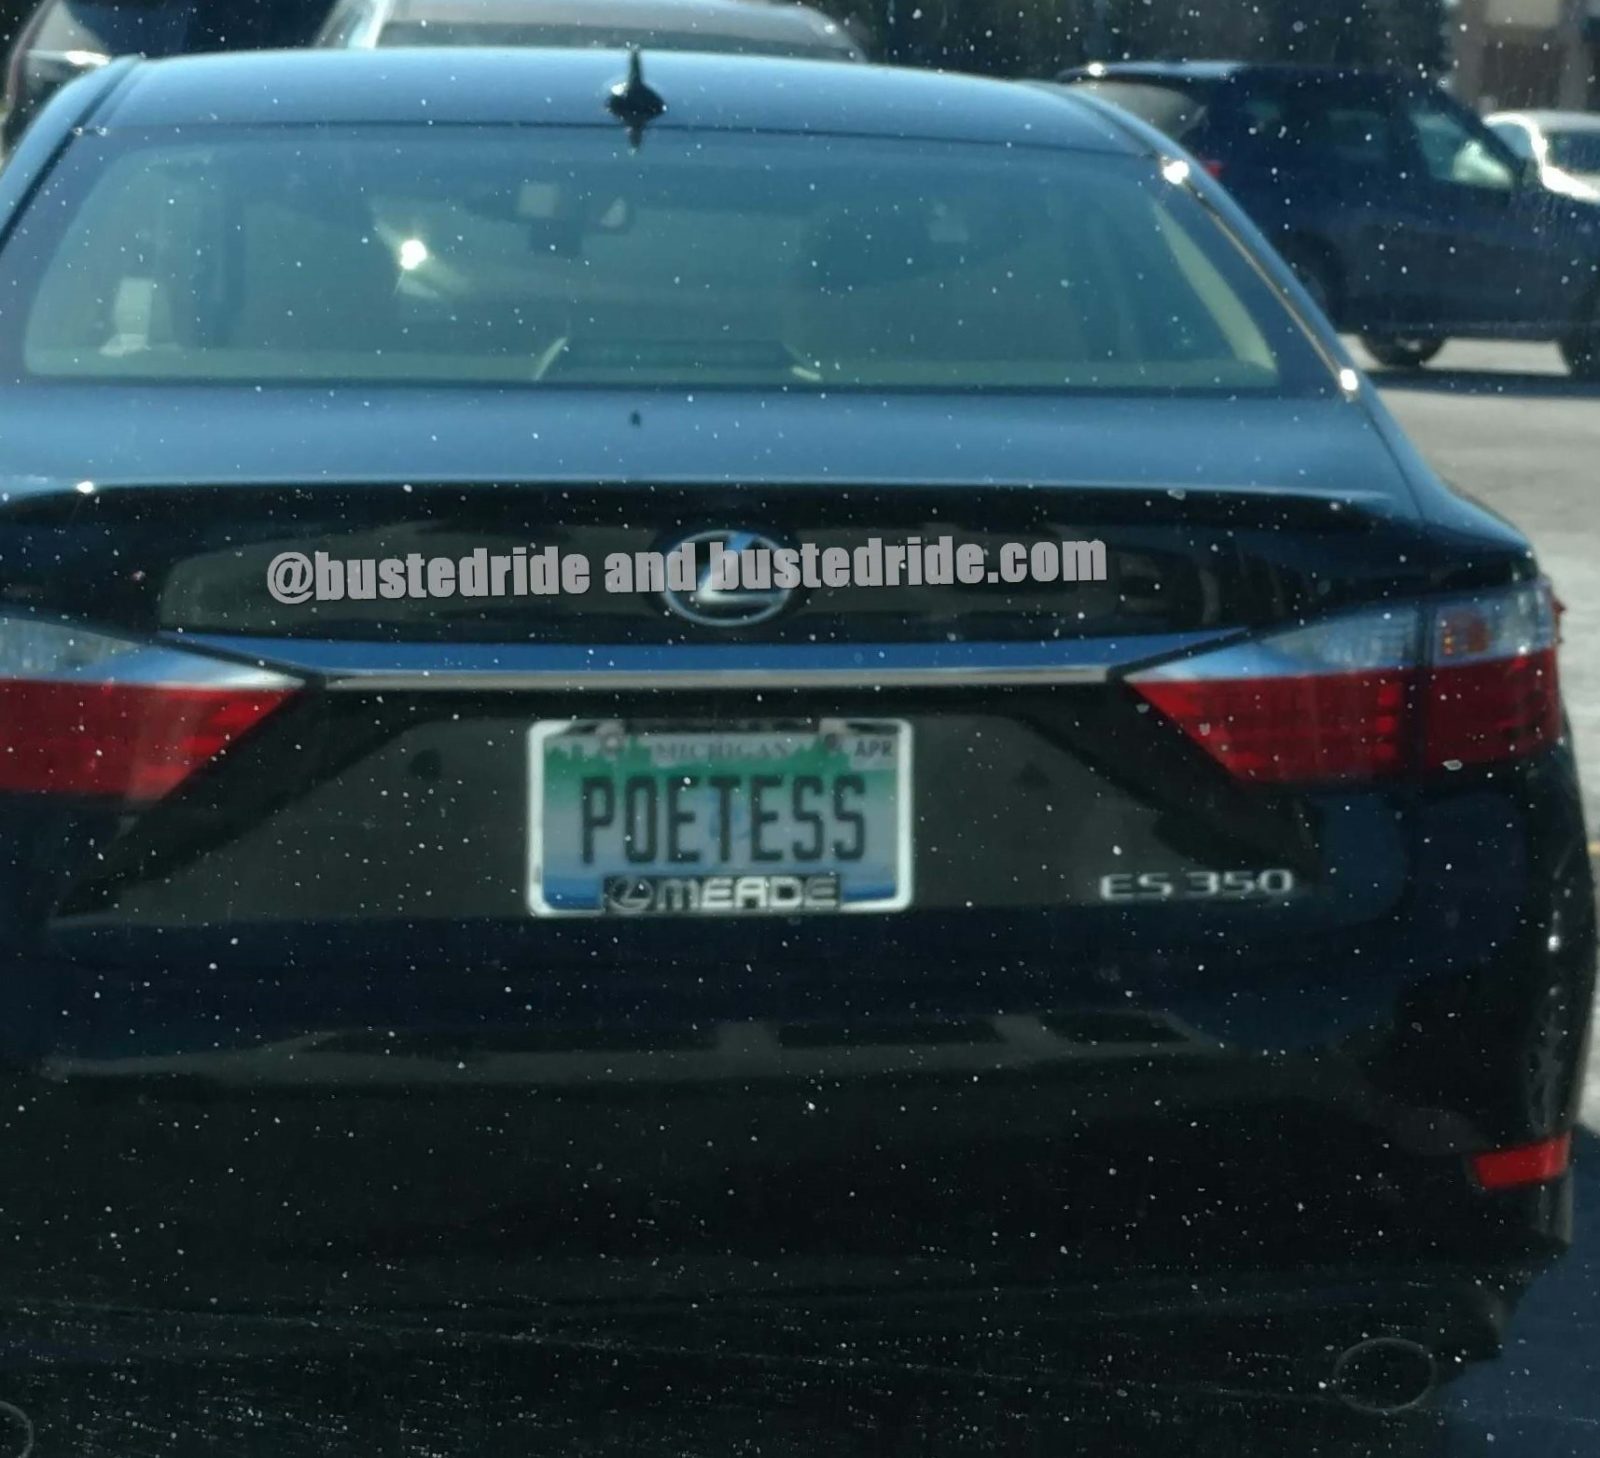 POETESS - Vanity License Plate by Busted Ride